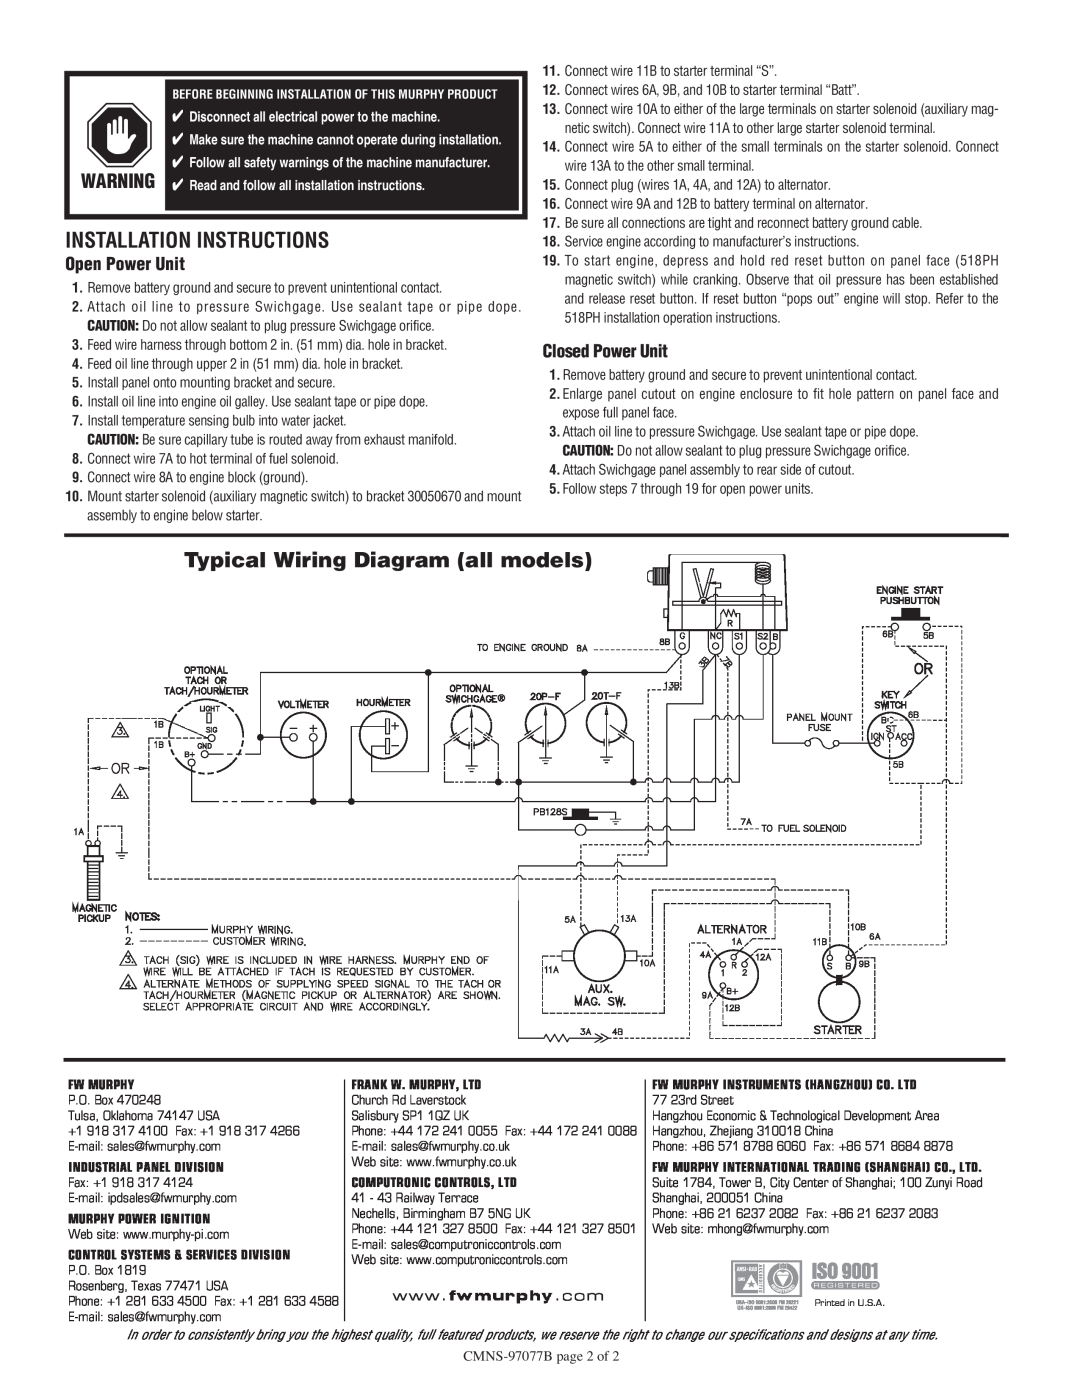 Murphy W0163 Installation Instructions, Typical Wiring Diagram all models, Open Power Unit, Closed Power Unit, CMNS-97077B 